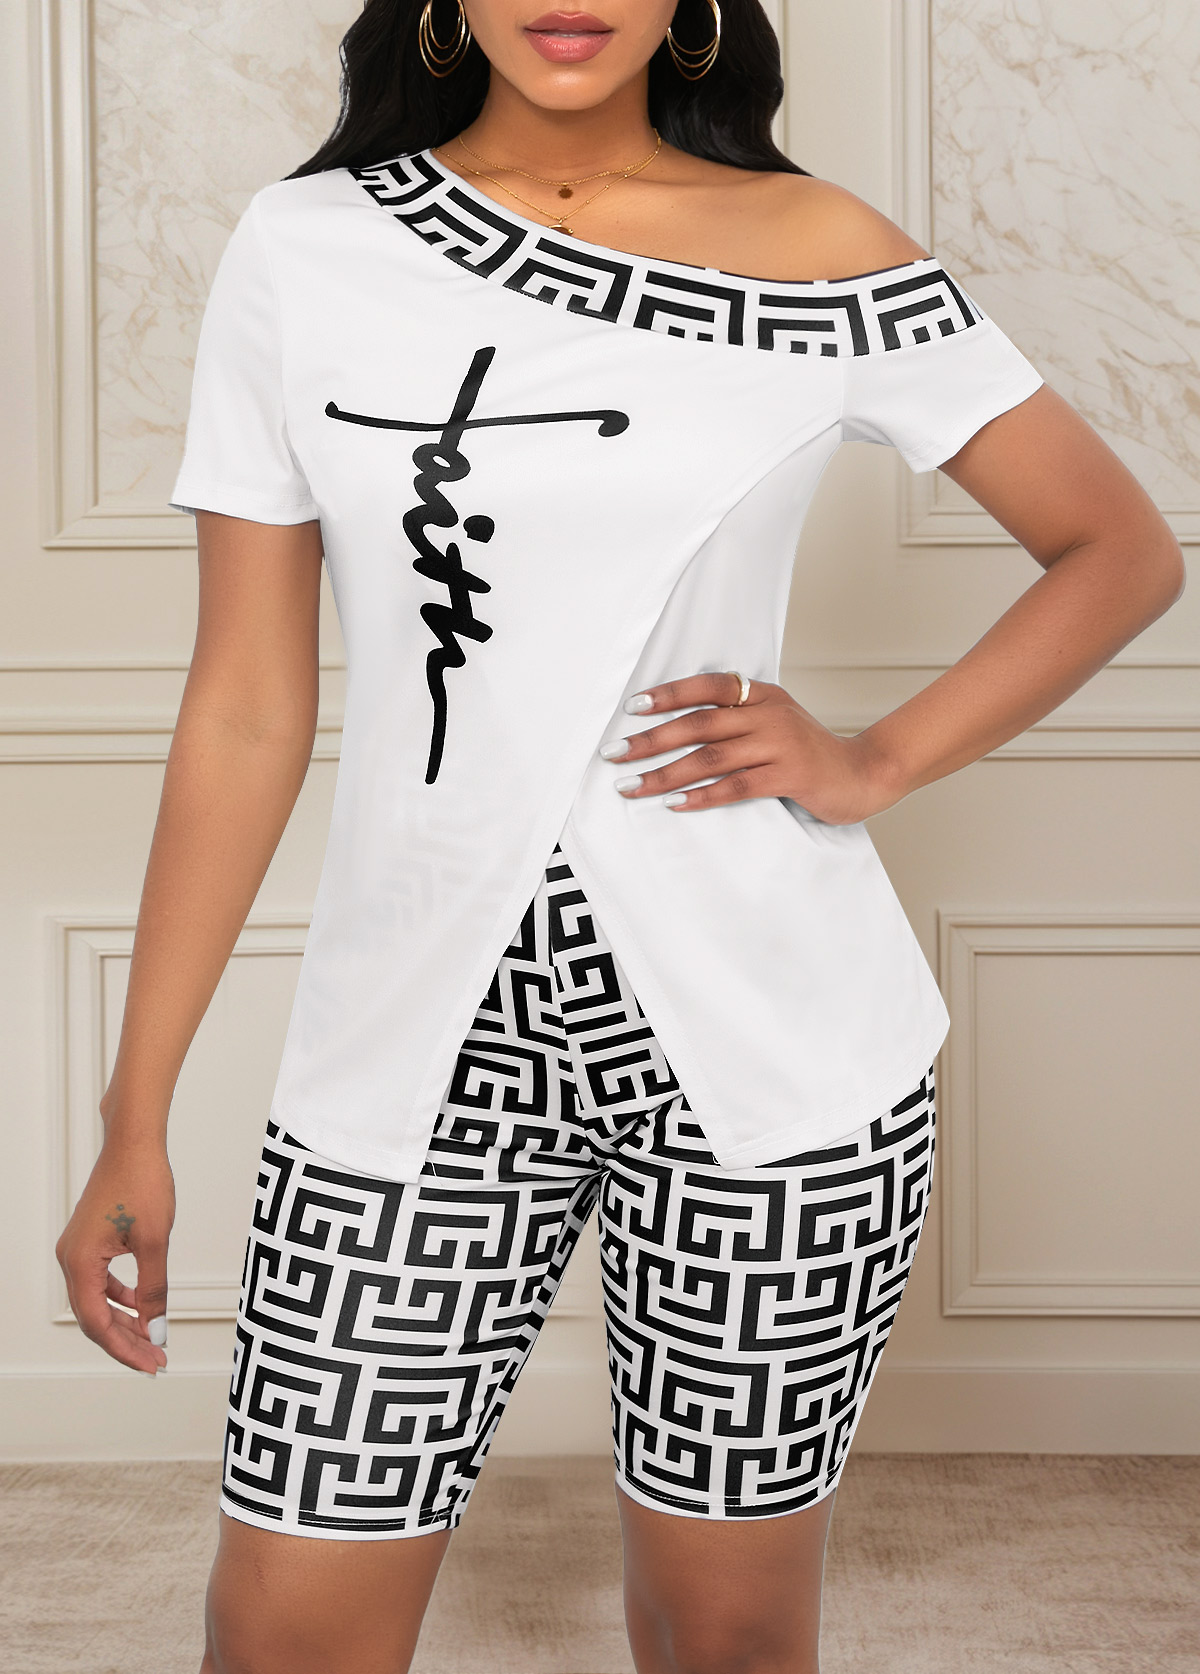 Patchwork Geometric Print White Short Skinny Top and Shorts